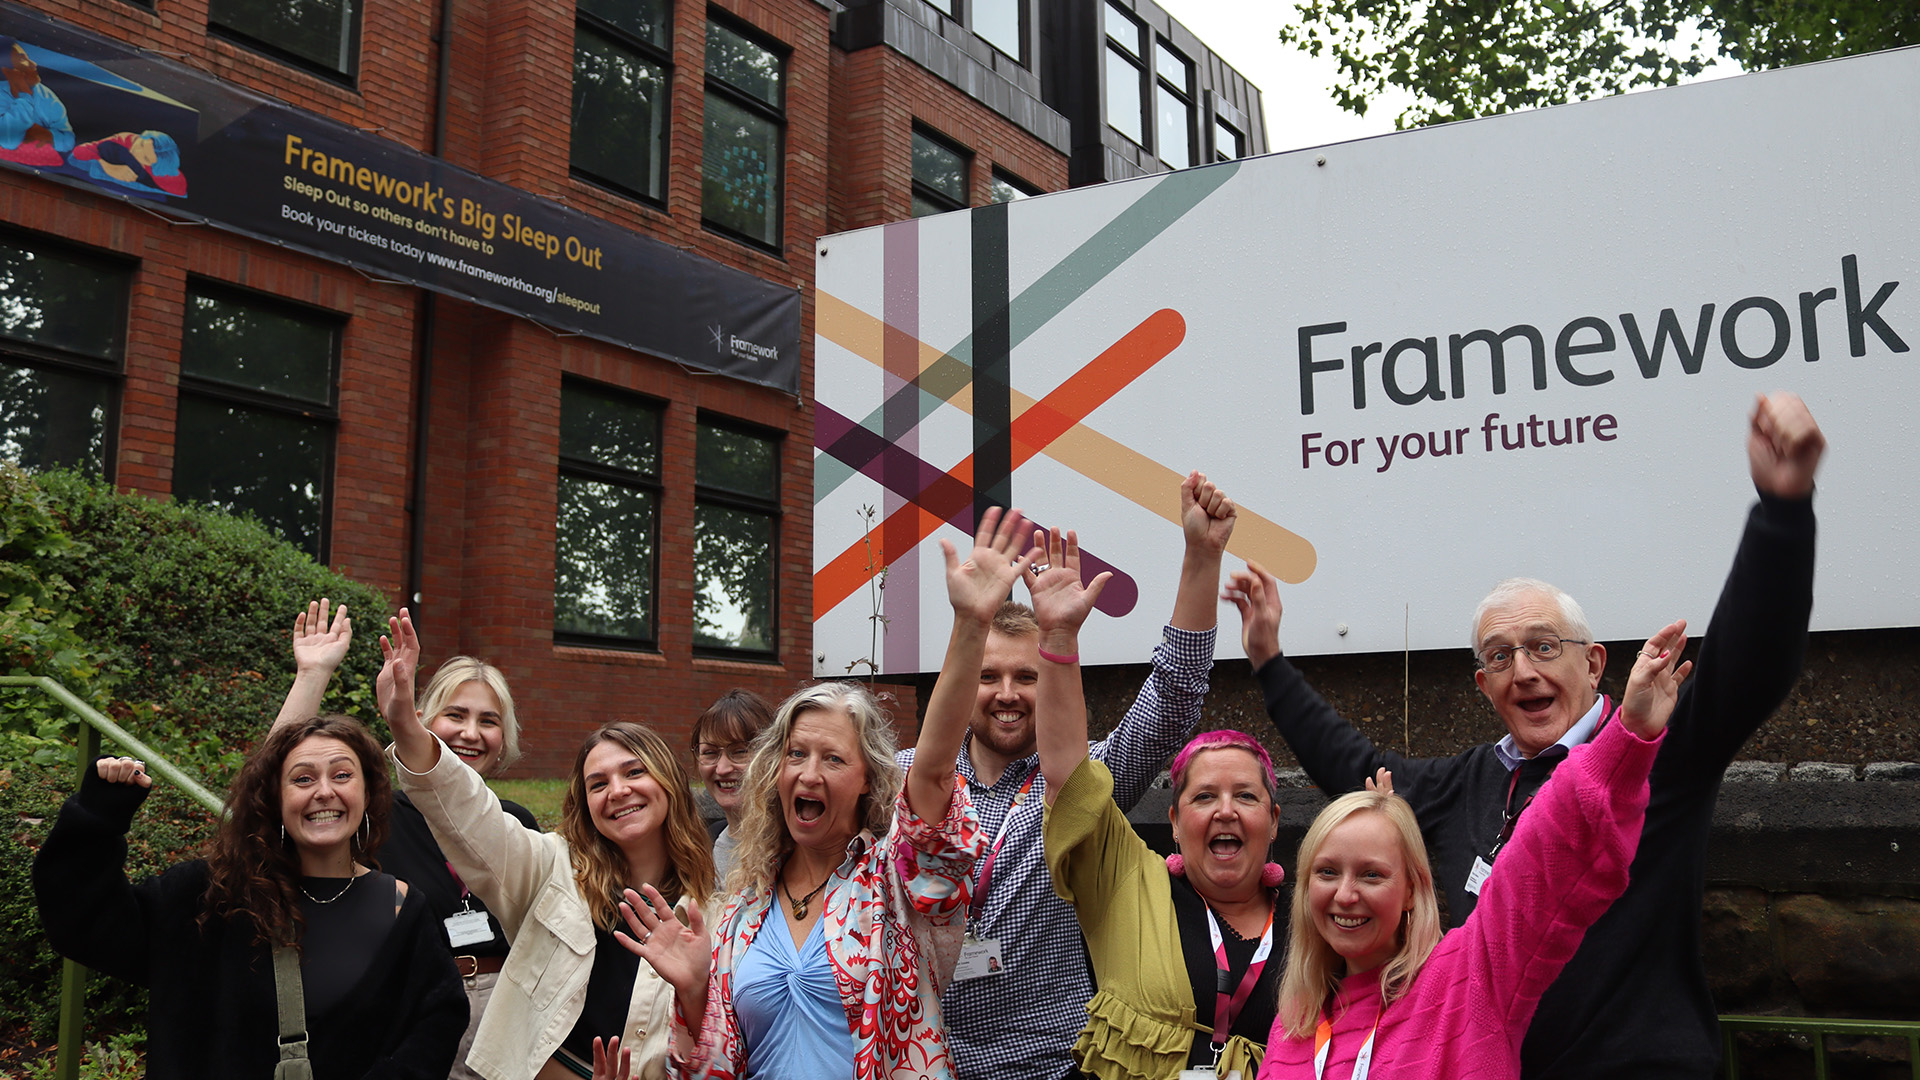 Employees from Redbrick Communications and Framework pose for a photo outside Framework's head office in Nottingham